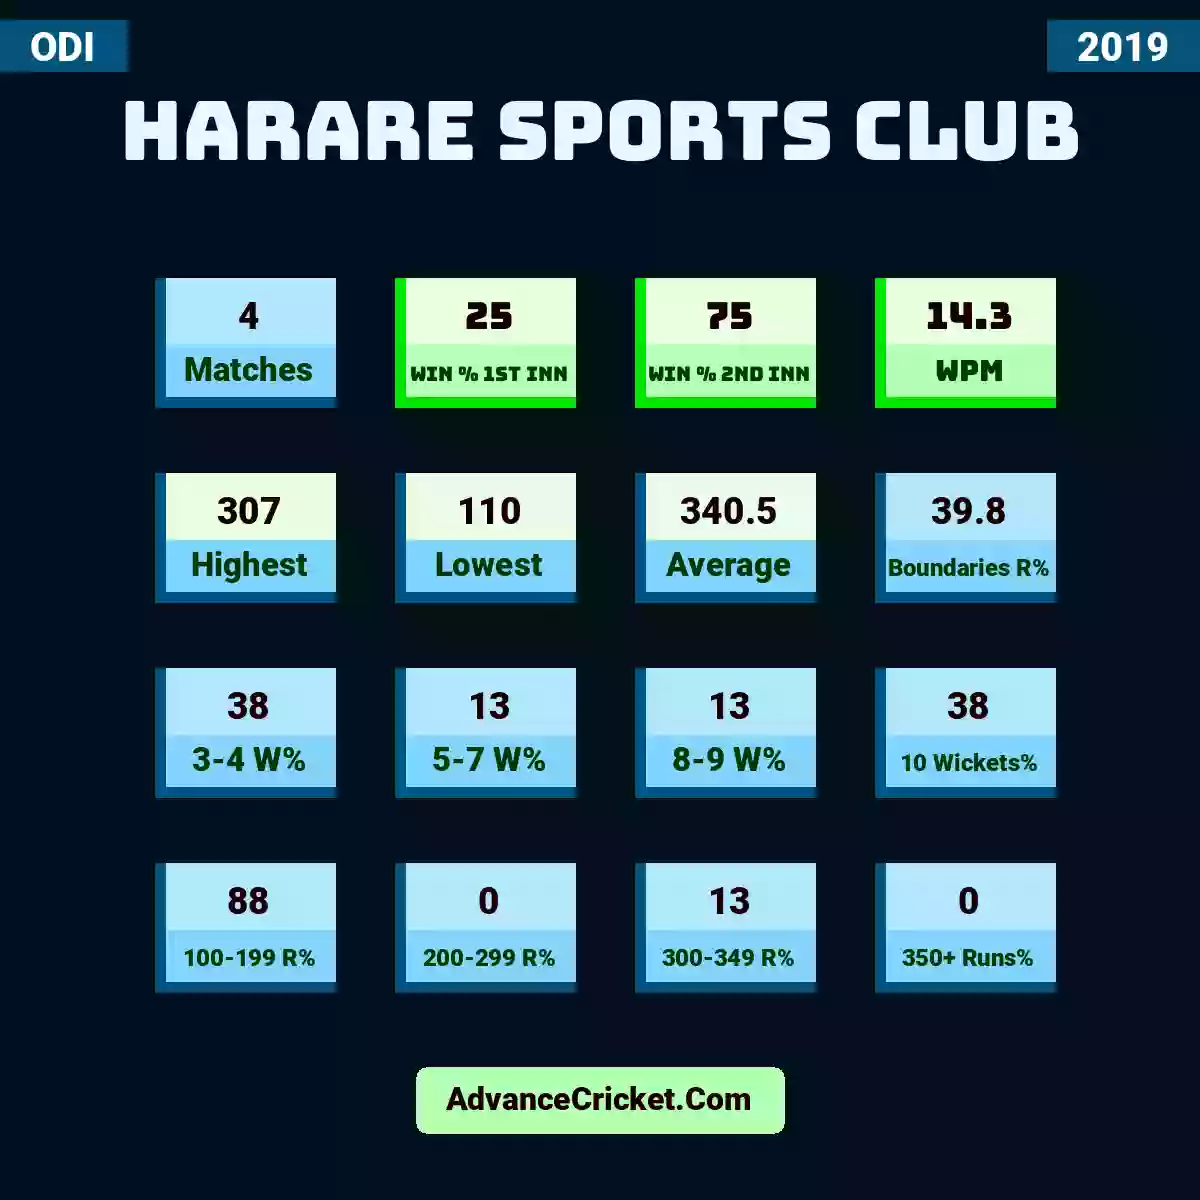 Image showing Harare Sports Club with Matches: 4, Win % 1st Inn: 25, Win % 2nd Inn: 75, WPM: 14.3, Highest: 307, Lowest: 110, Average: 340.5, Boundaries R%: 39.8, 3-4 W%: 38, 5-7 W%: 13, 8-9 W%: 13, 10 Wickets%: 38, 100-199 R%: 88, 200-299 R%: 0, 300-349 R%: 13, 350+ Runs%: 0.